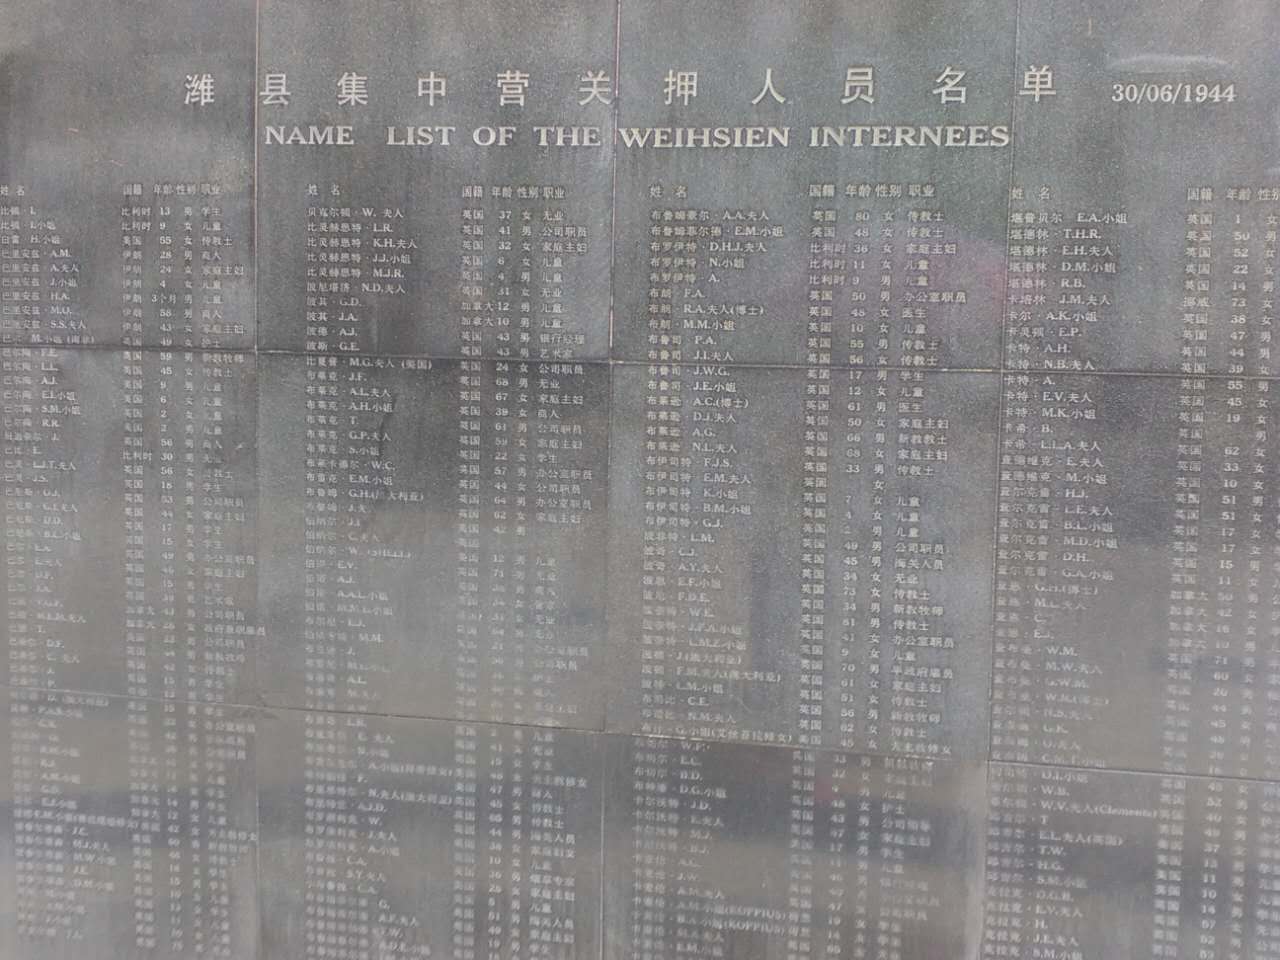 name List of the Weishin Camp Internees(Credit: Gospeltimes.cn)